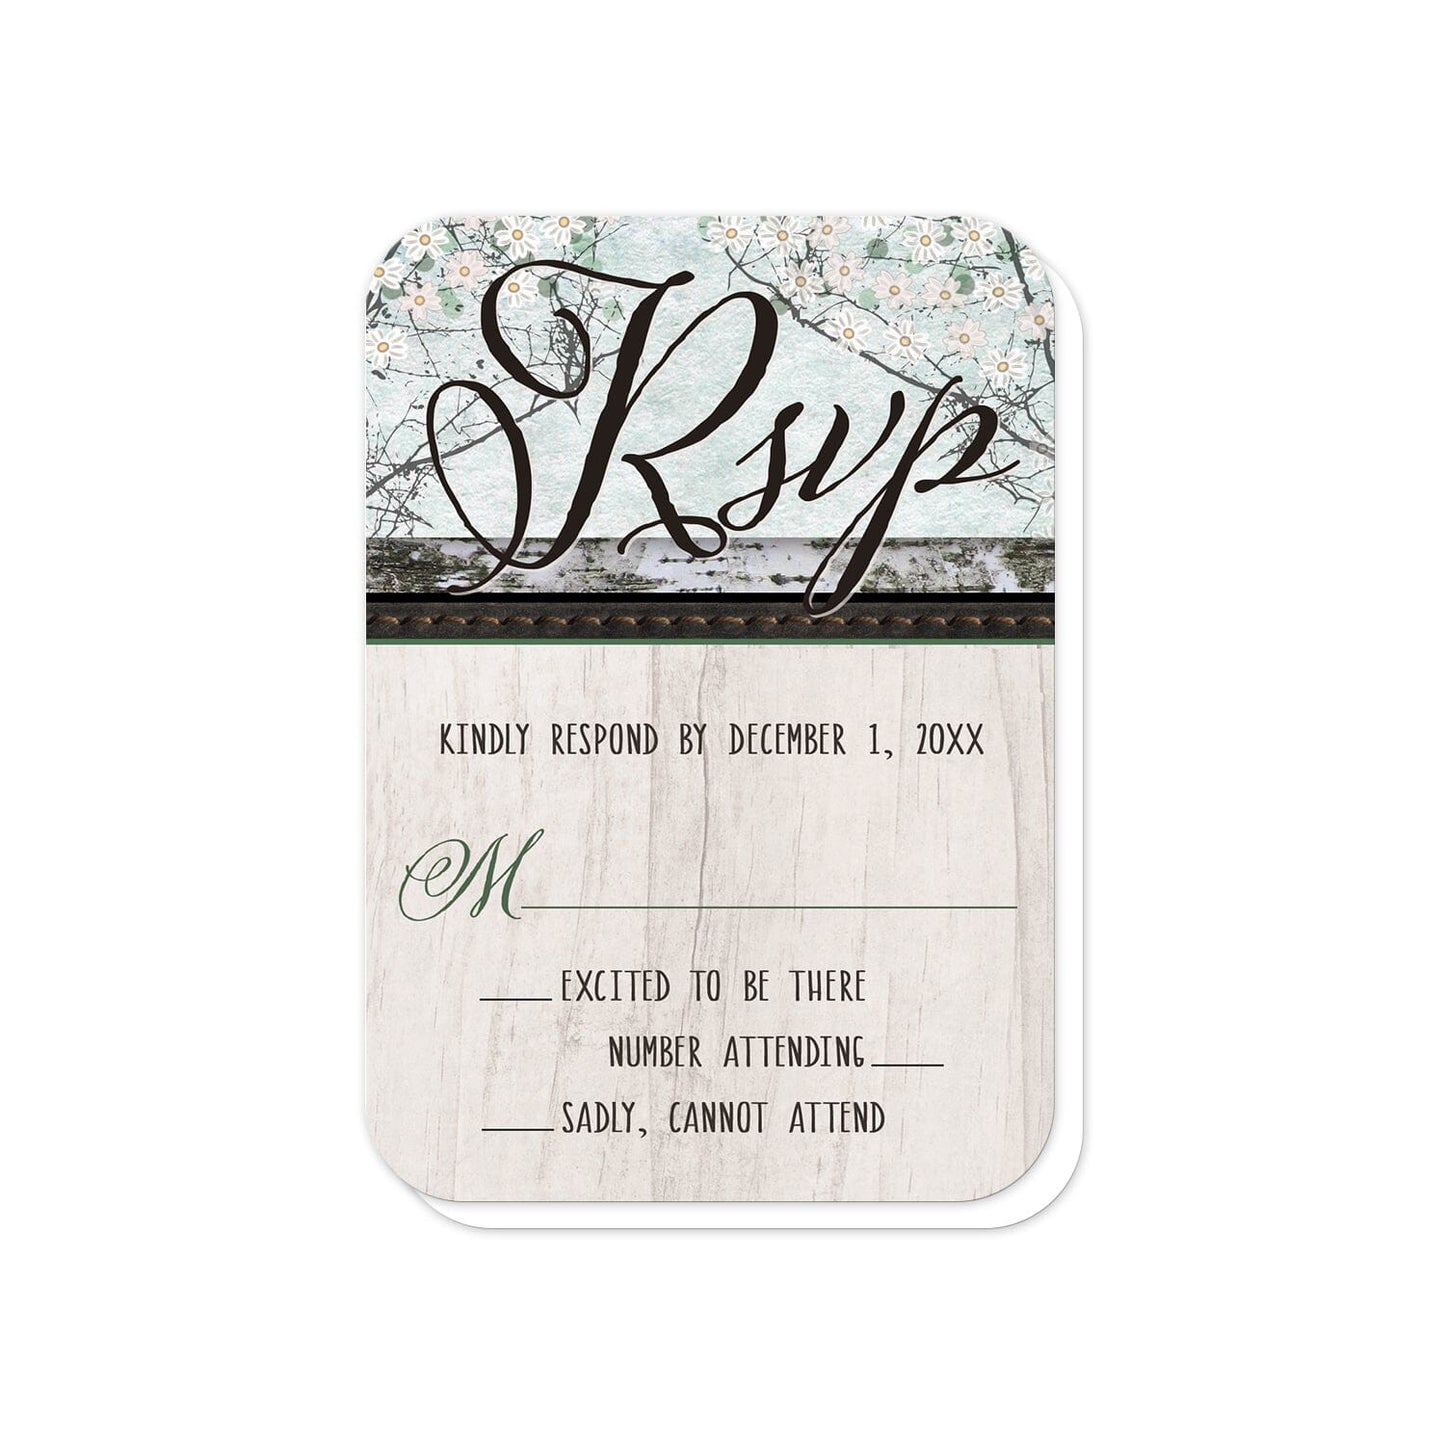 Rustic Bear Floral Wood RSVP Cards (with rounded corners) at Artistically Invited.